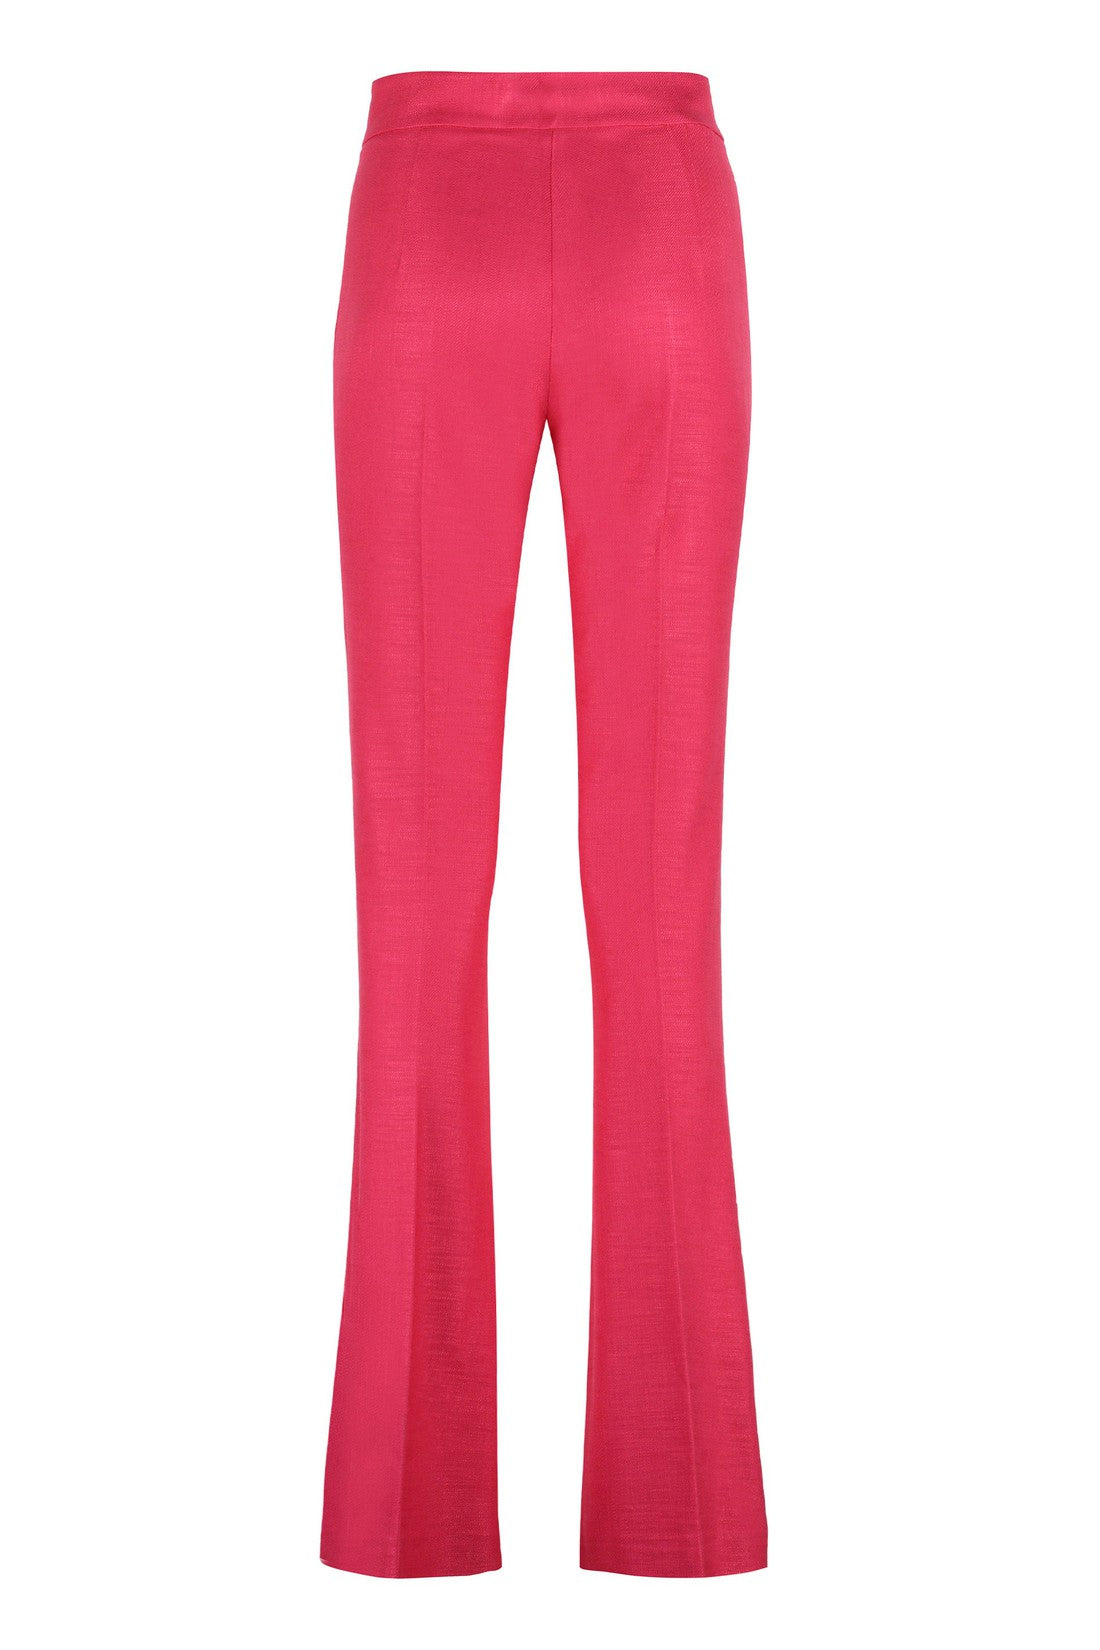 Genny-OUTLET-SALE-Flared tailored trousers-ARCHIVIST